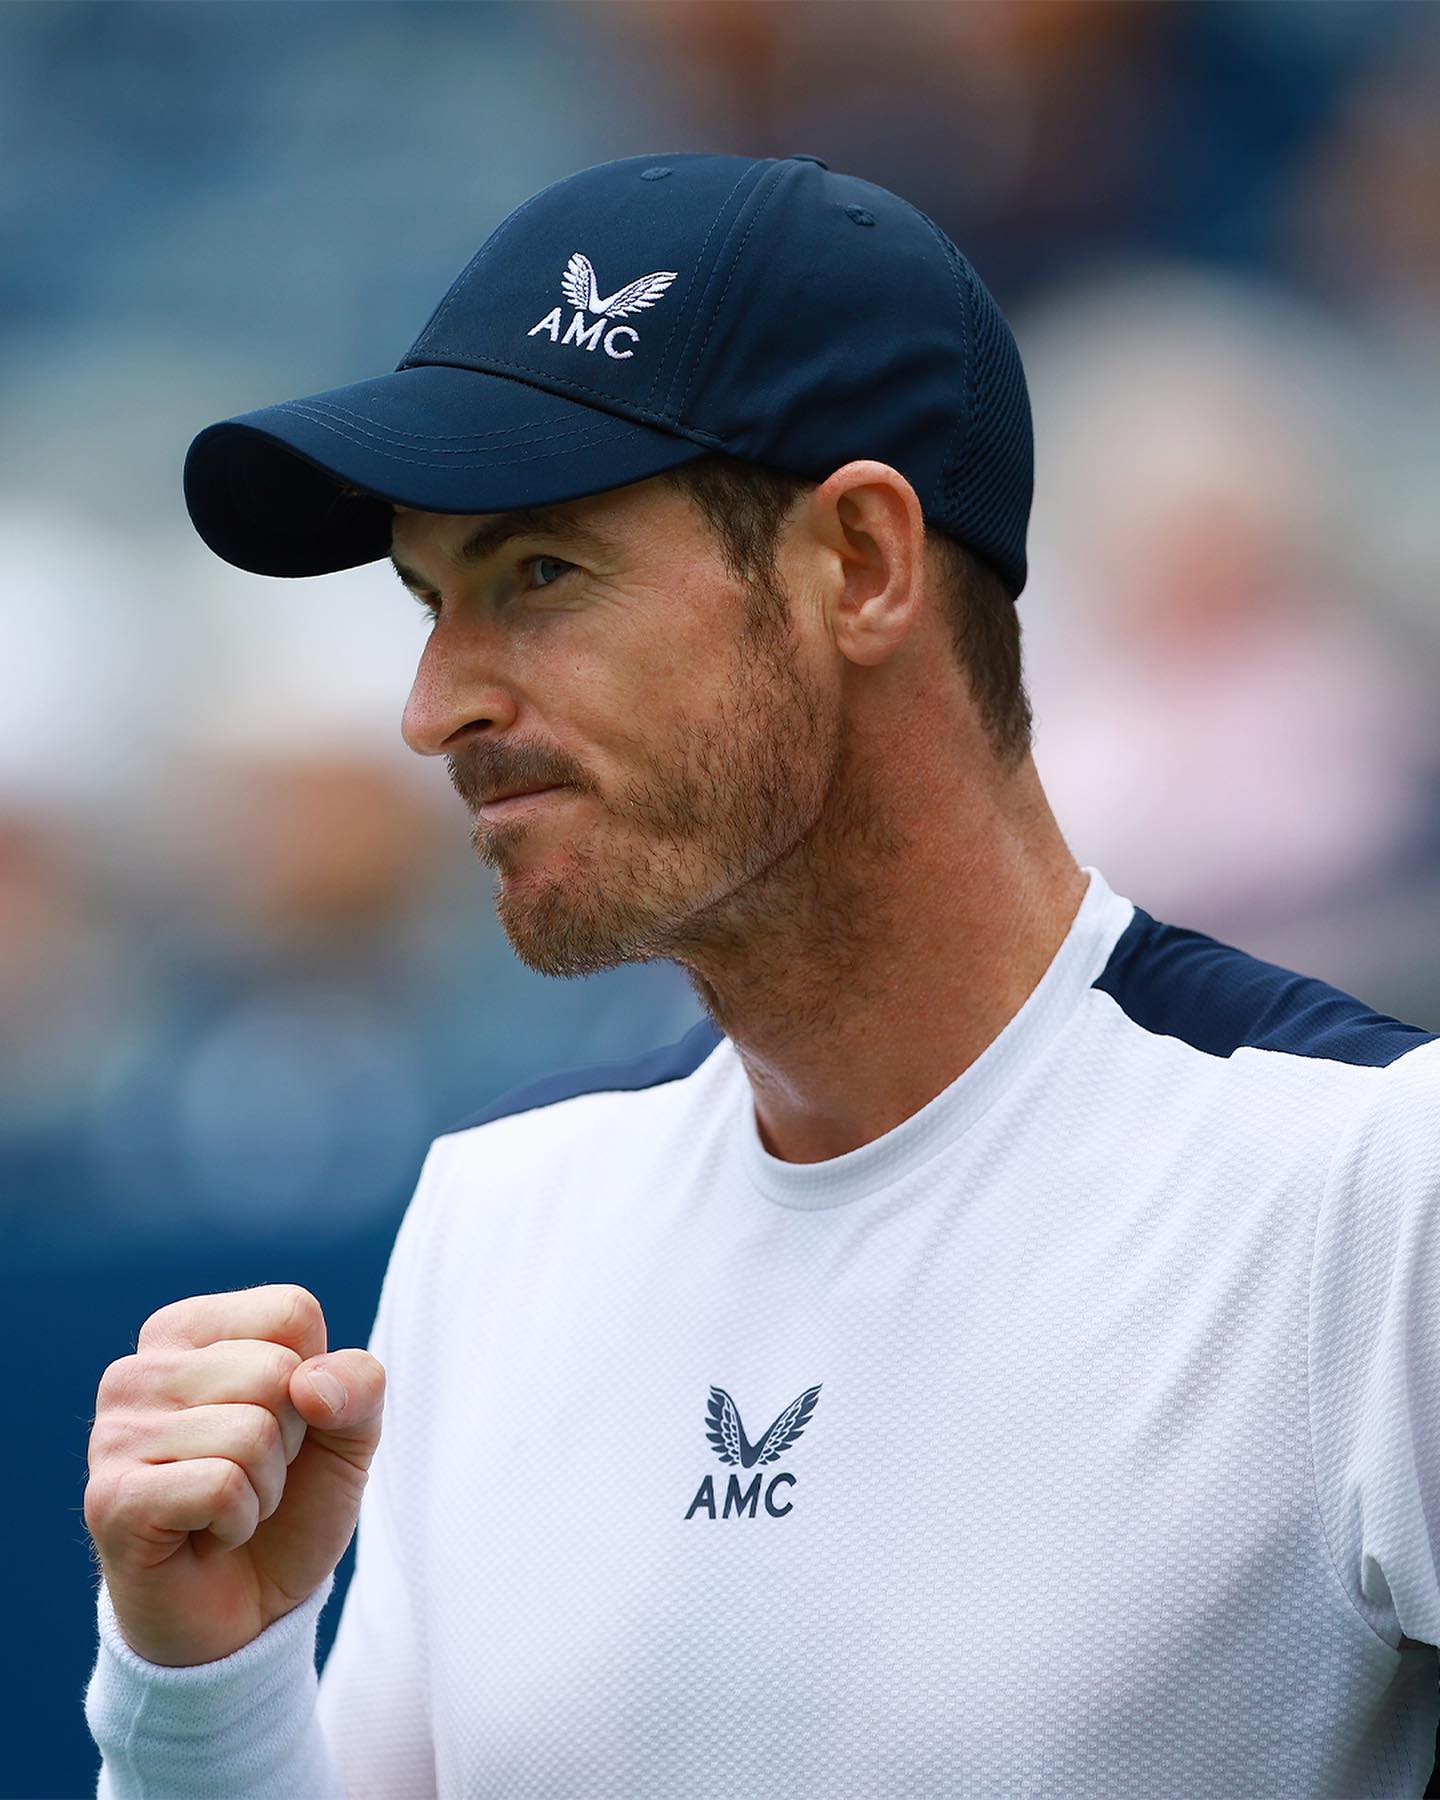 Andy Murray Biography: Age, Ranking, Net Worth, Wife, Children, Coach, Grand Slam, Family